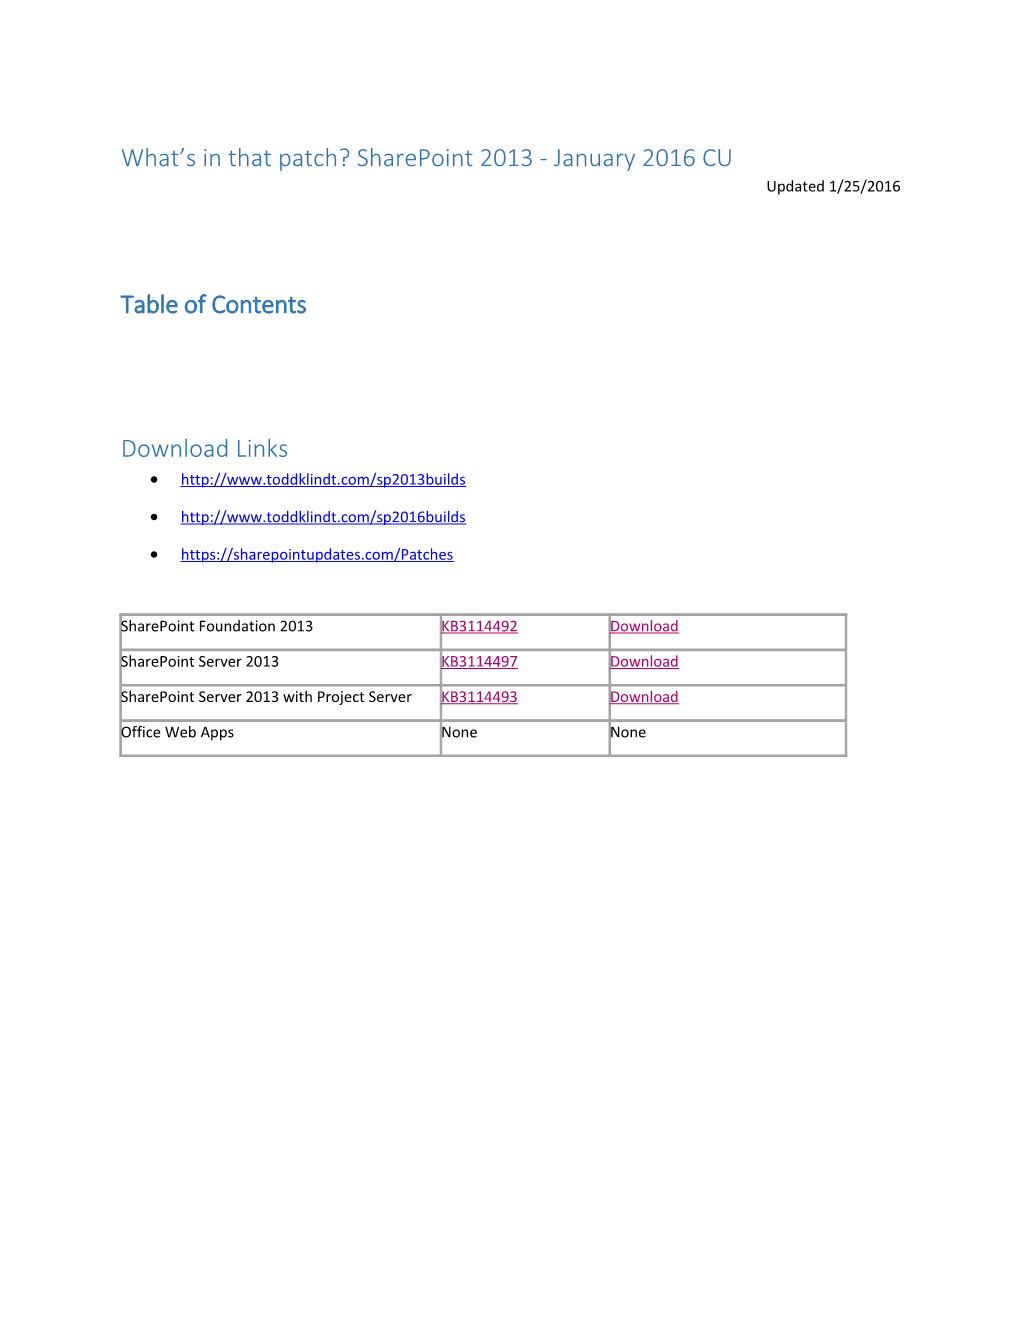 What S in That Patch?Sharepoint2013 - January 2016 CU